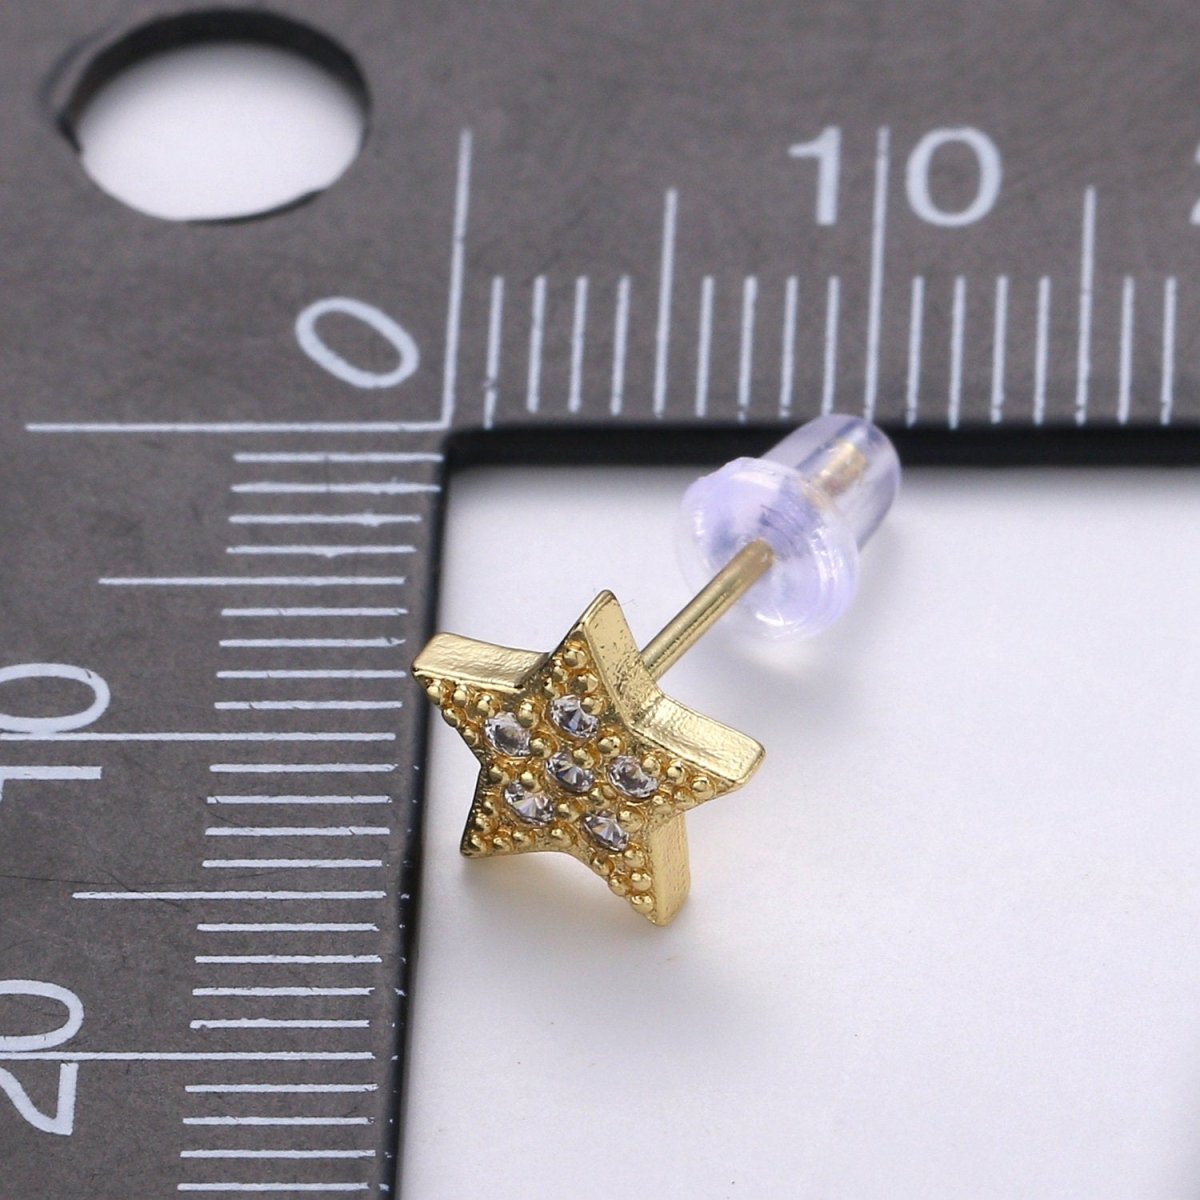 Mini CZ Paved Star Stud Earring Cartilage Earring, Gold Star stud, dainty cartilage earring gold moon stud earring, sparkly Pushback stud Q-295 - DLUXCA